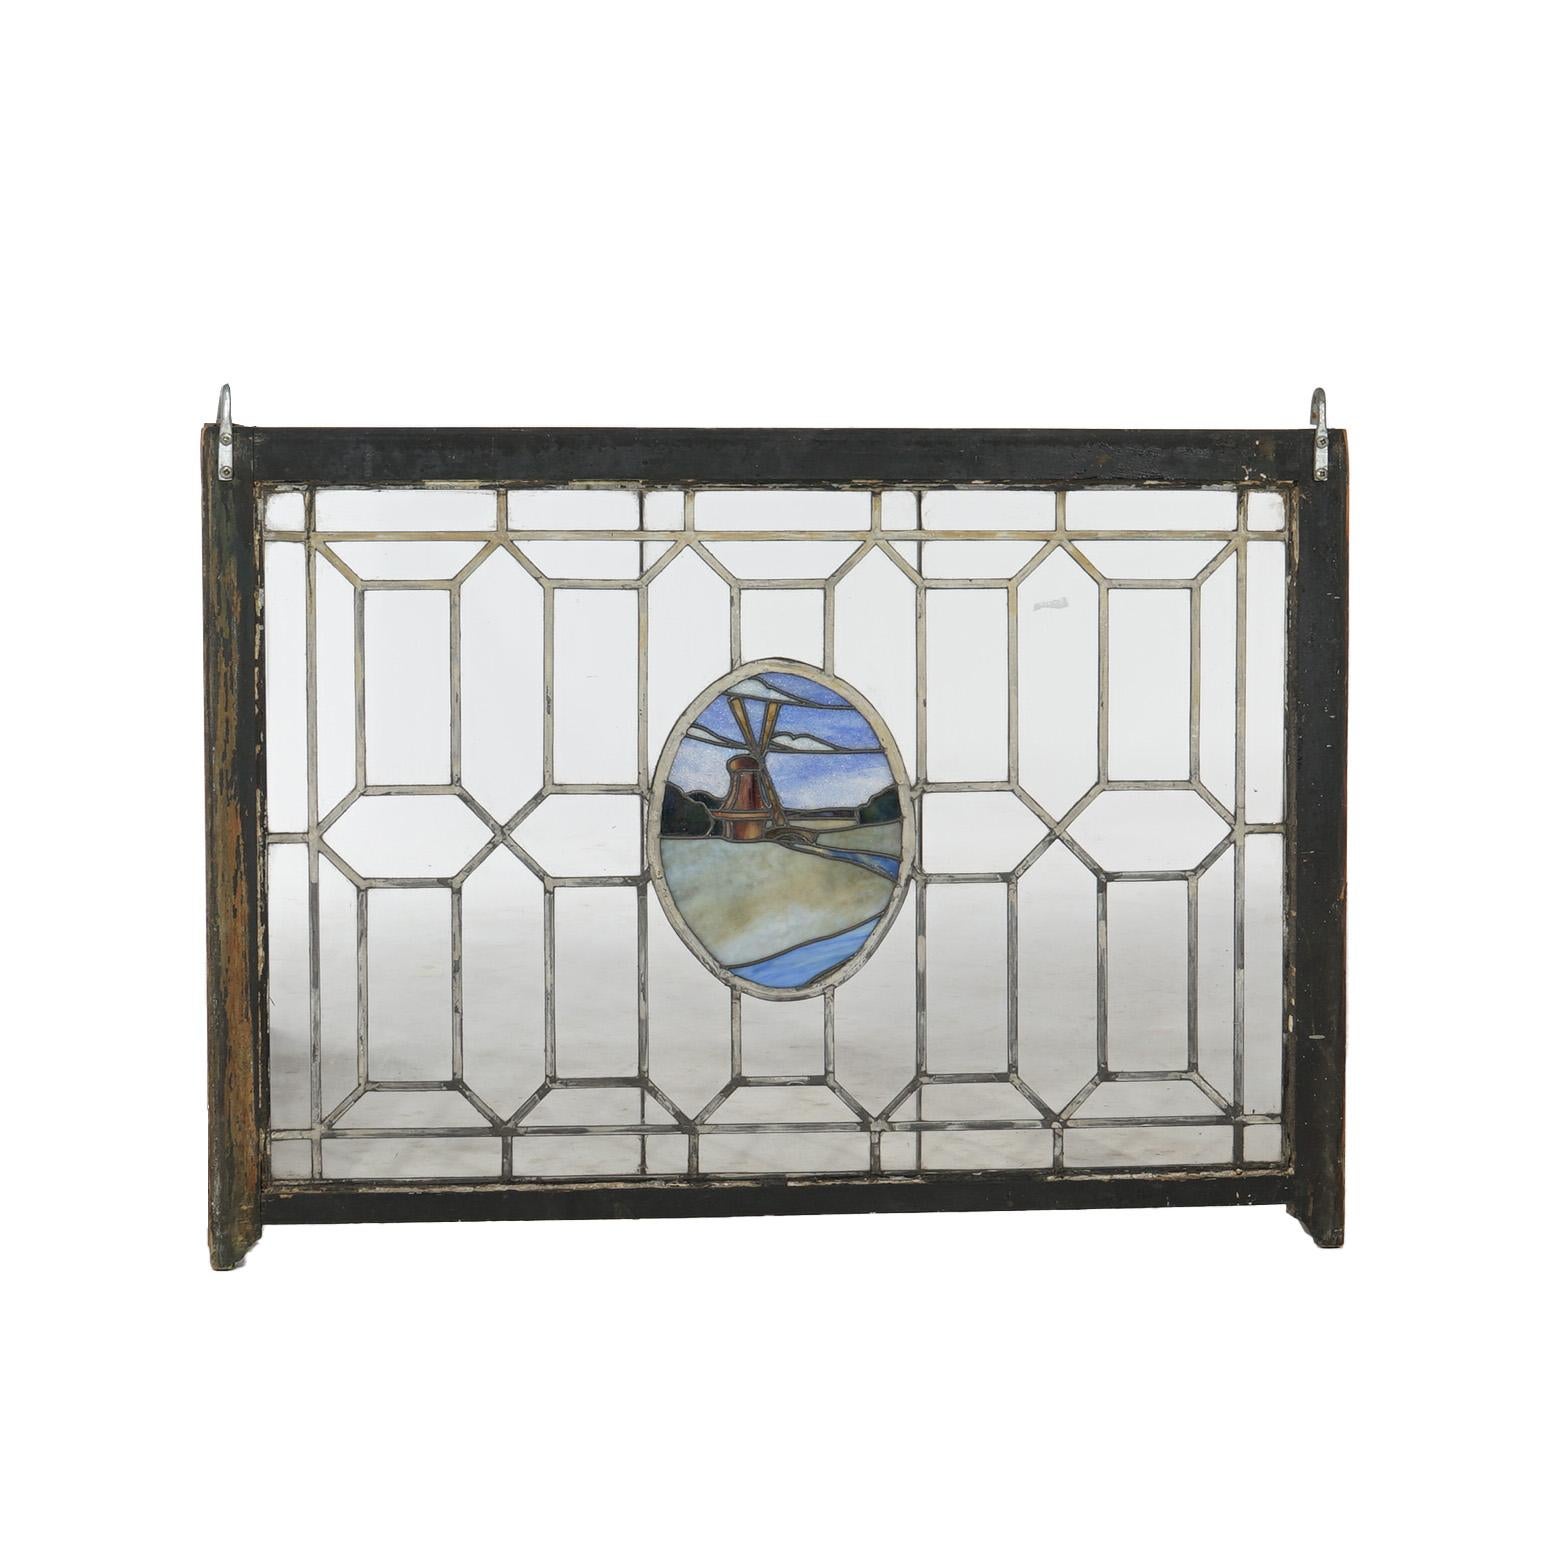 Arts and Crafts Antique Arts & Crafts Leaded & Stained Glass Window with Windmill, c1910 For Sale